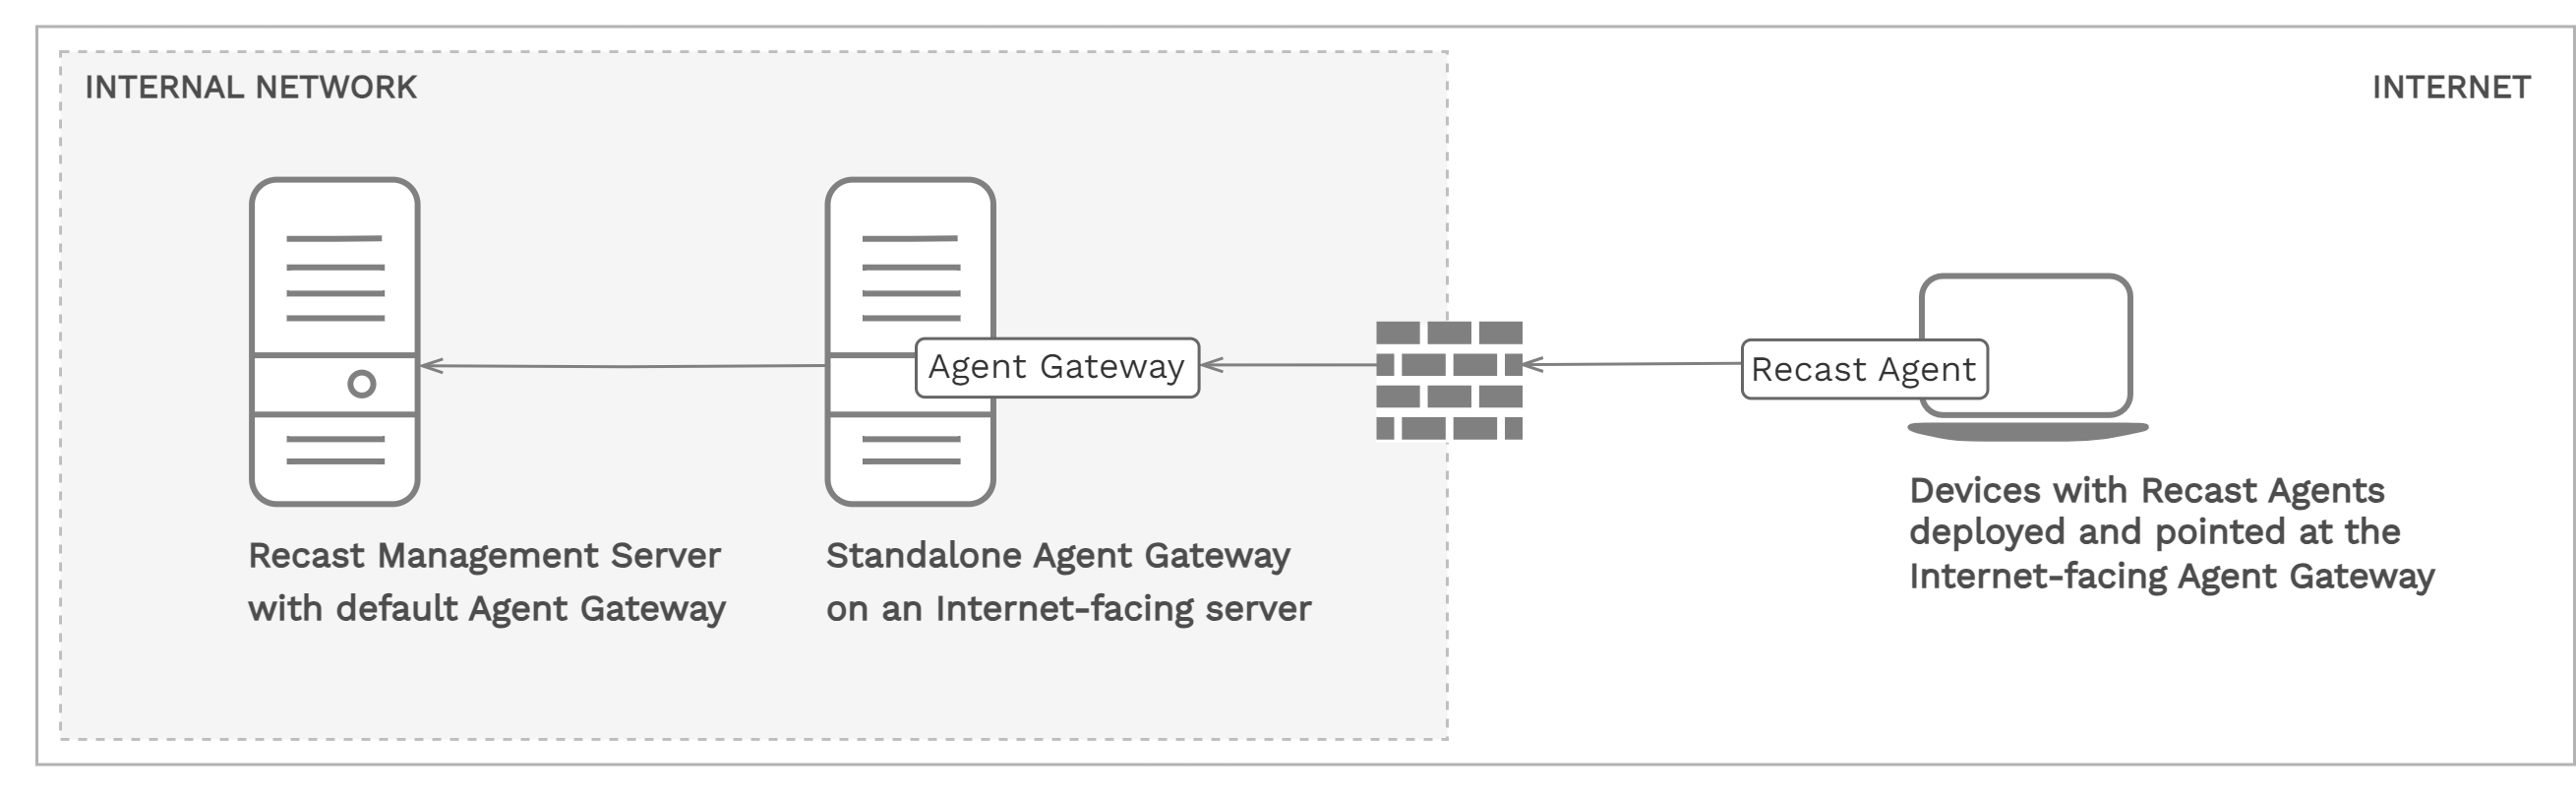 Network architecture diagram showing Recast Management Server configuration with a standalone Agent Gateway